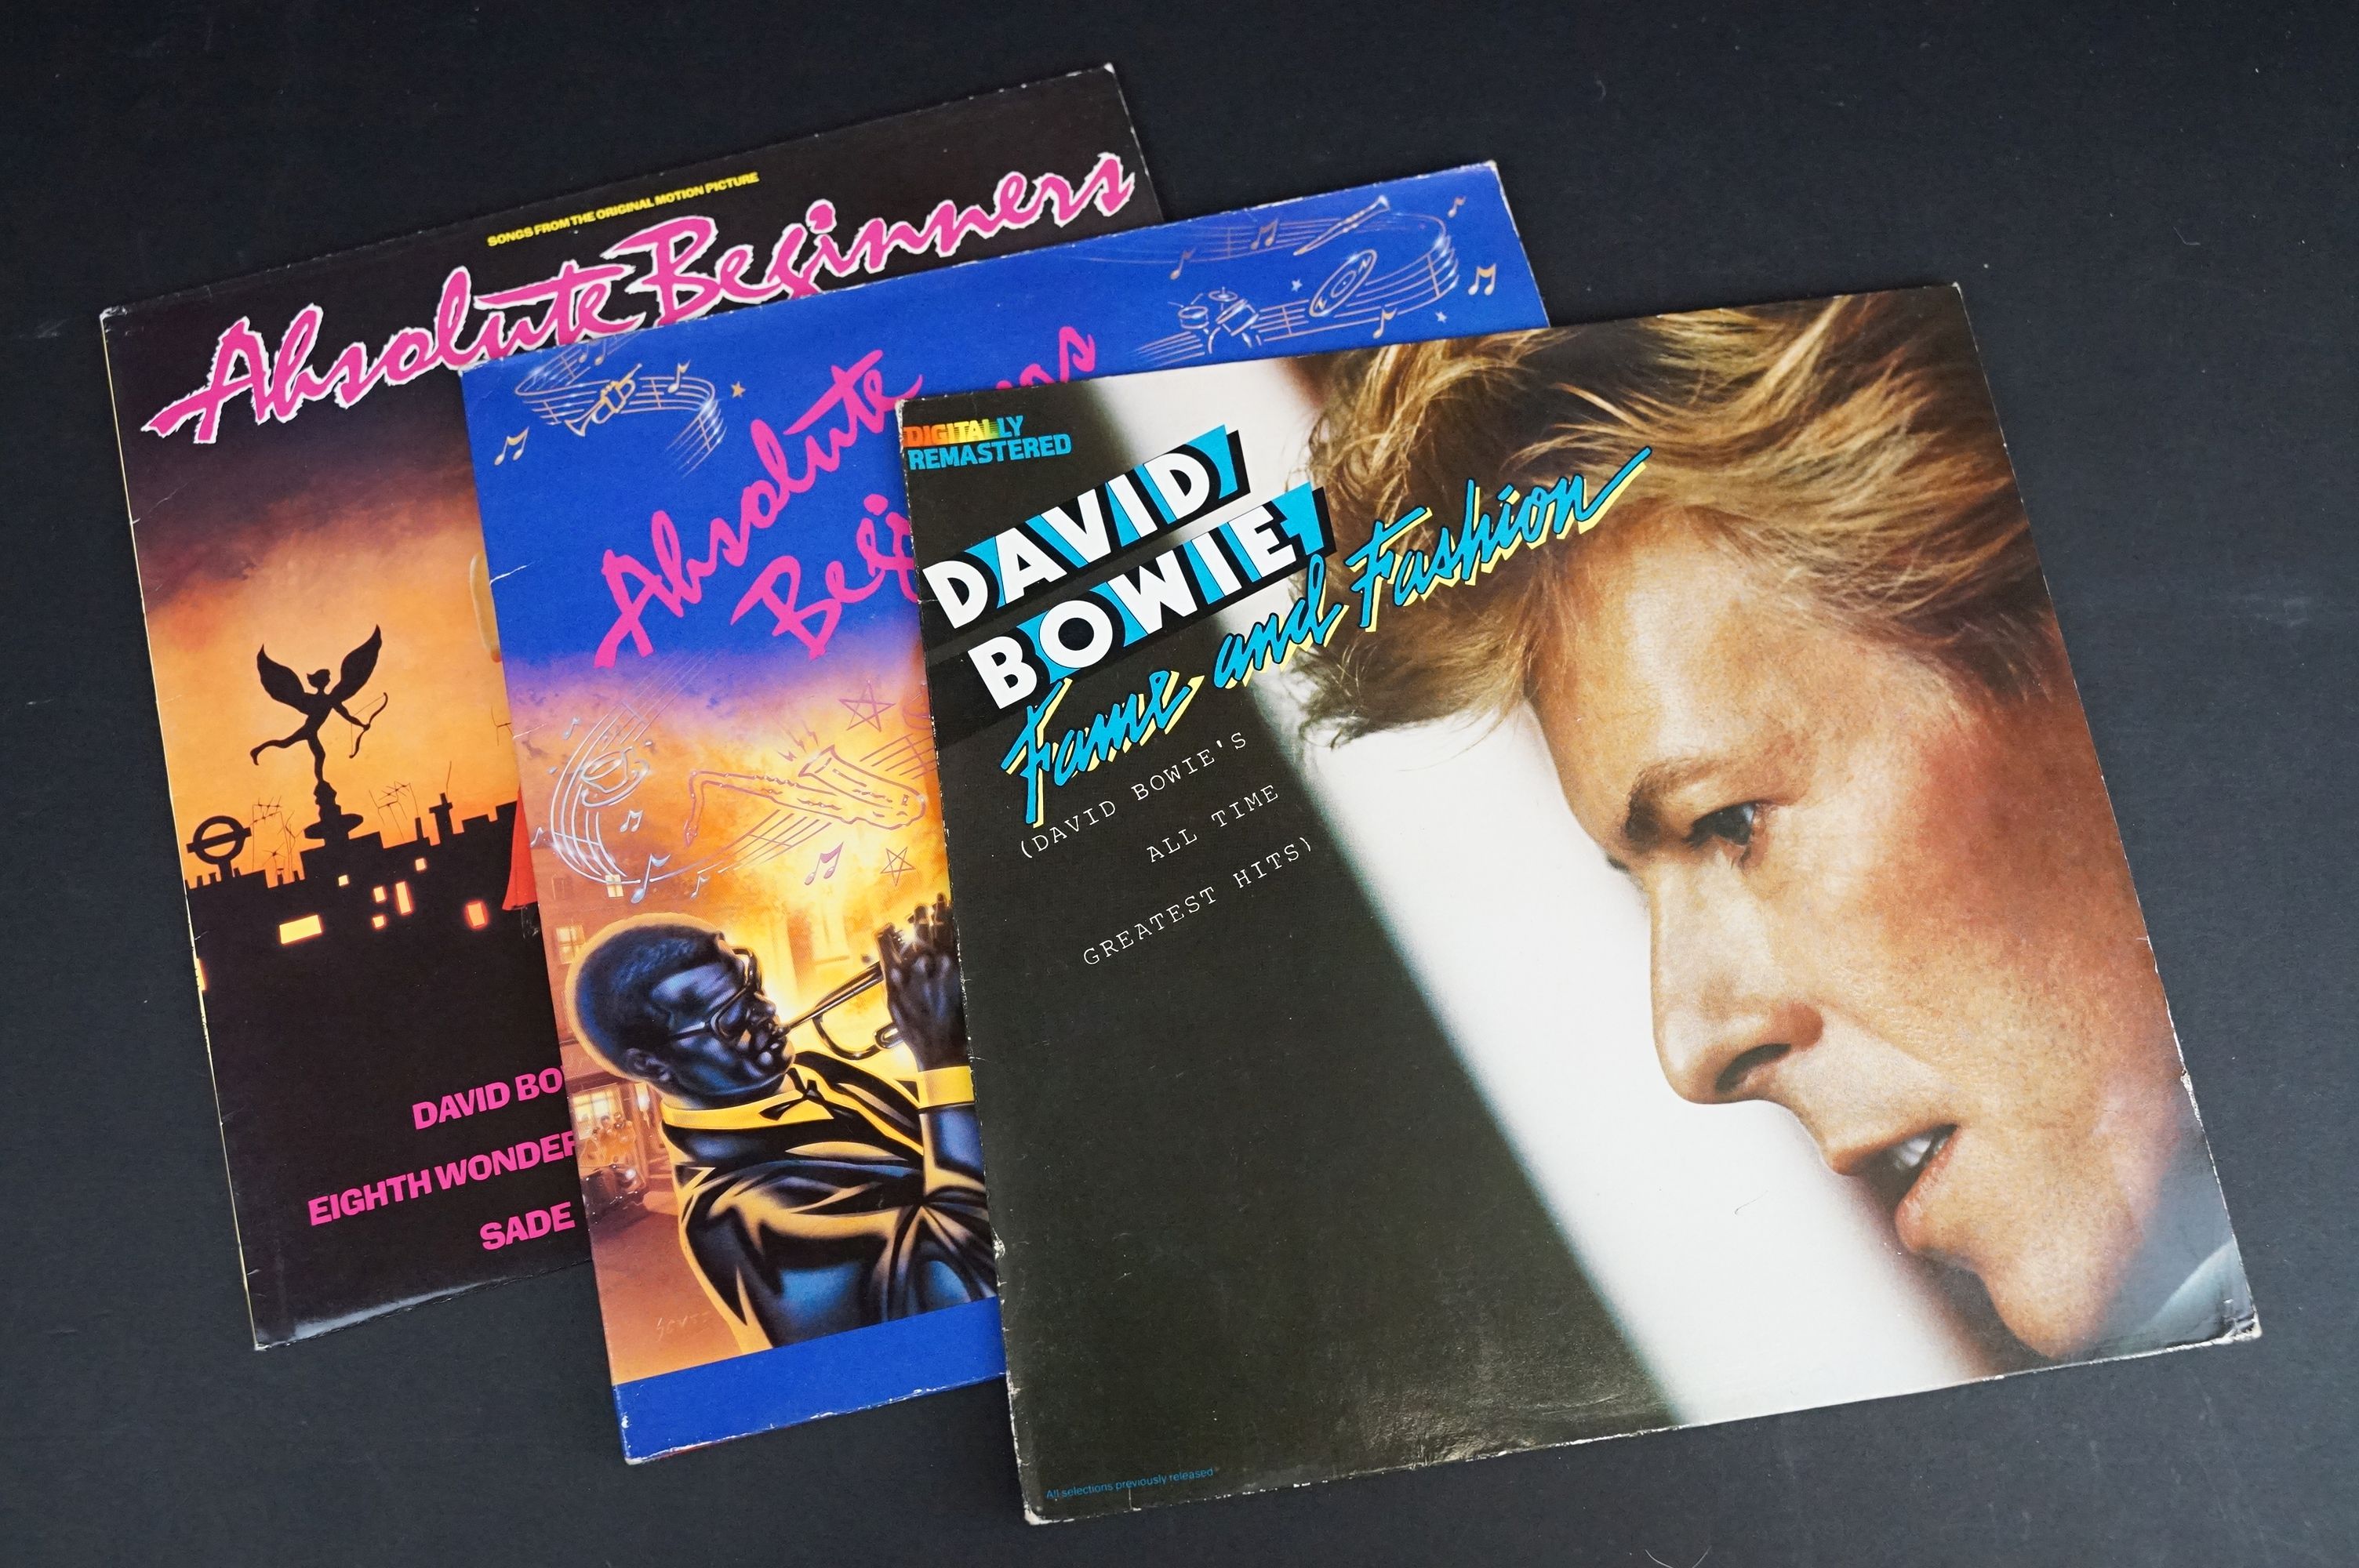 Vinyl / Autographs - 15 David Bowie and related albums signed by members of David Bowie’s band and - Image 8 of 8